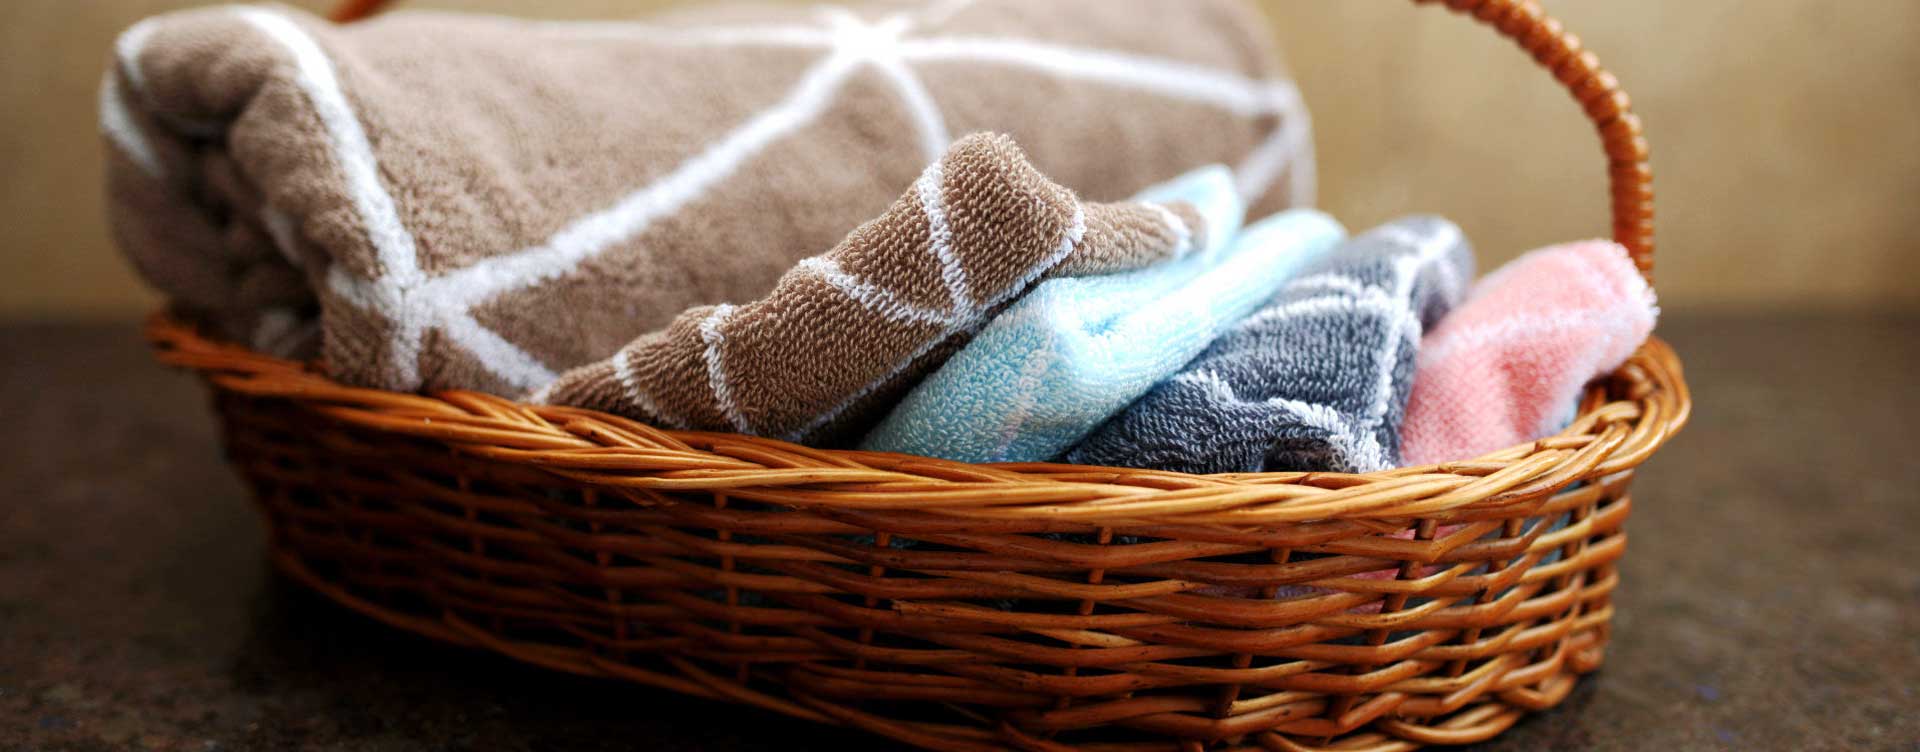 5 Points To Consider When Buying A Good Quality Towel